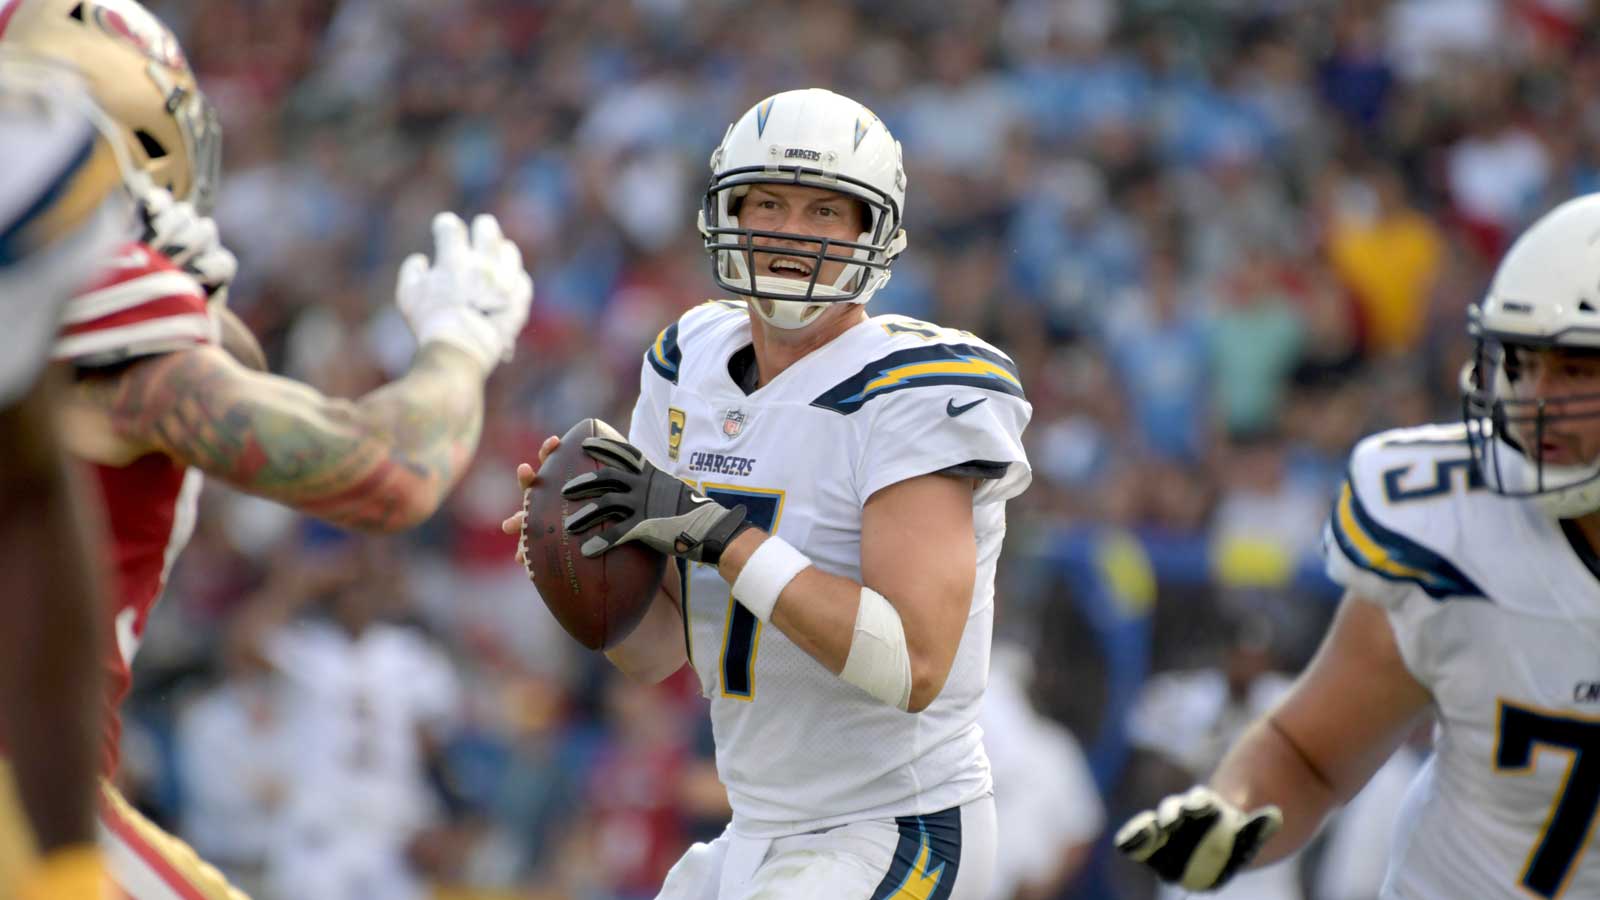 Chargers rally to beat 49ers behind Rivers' 3 TDs